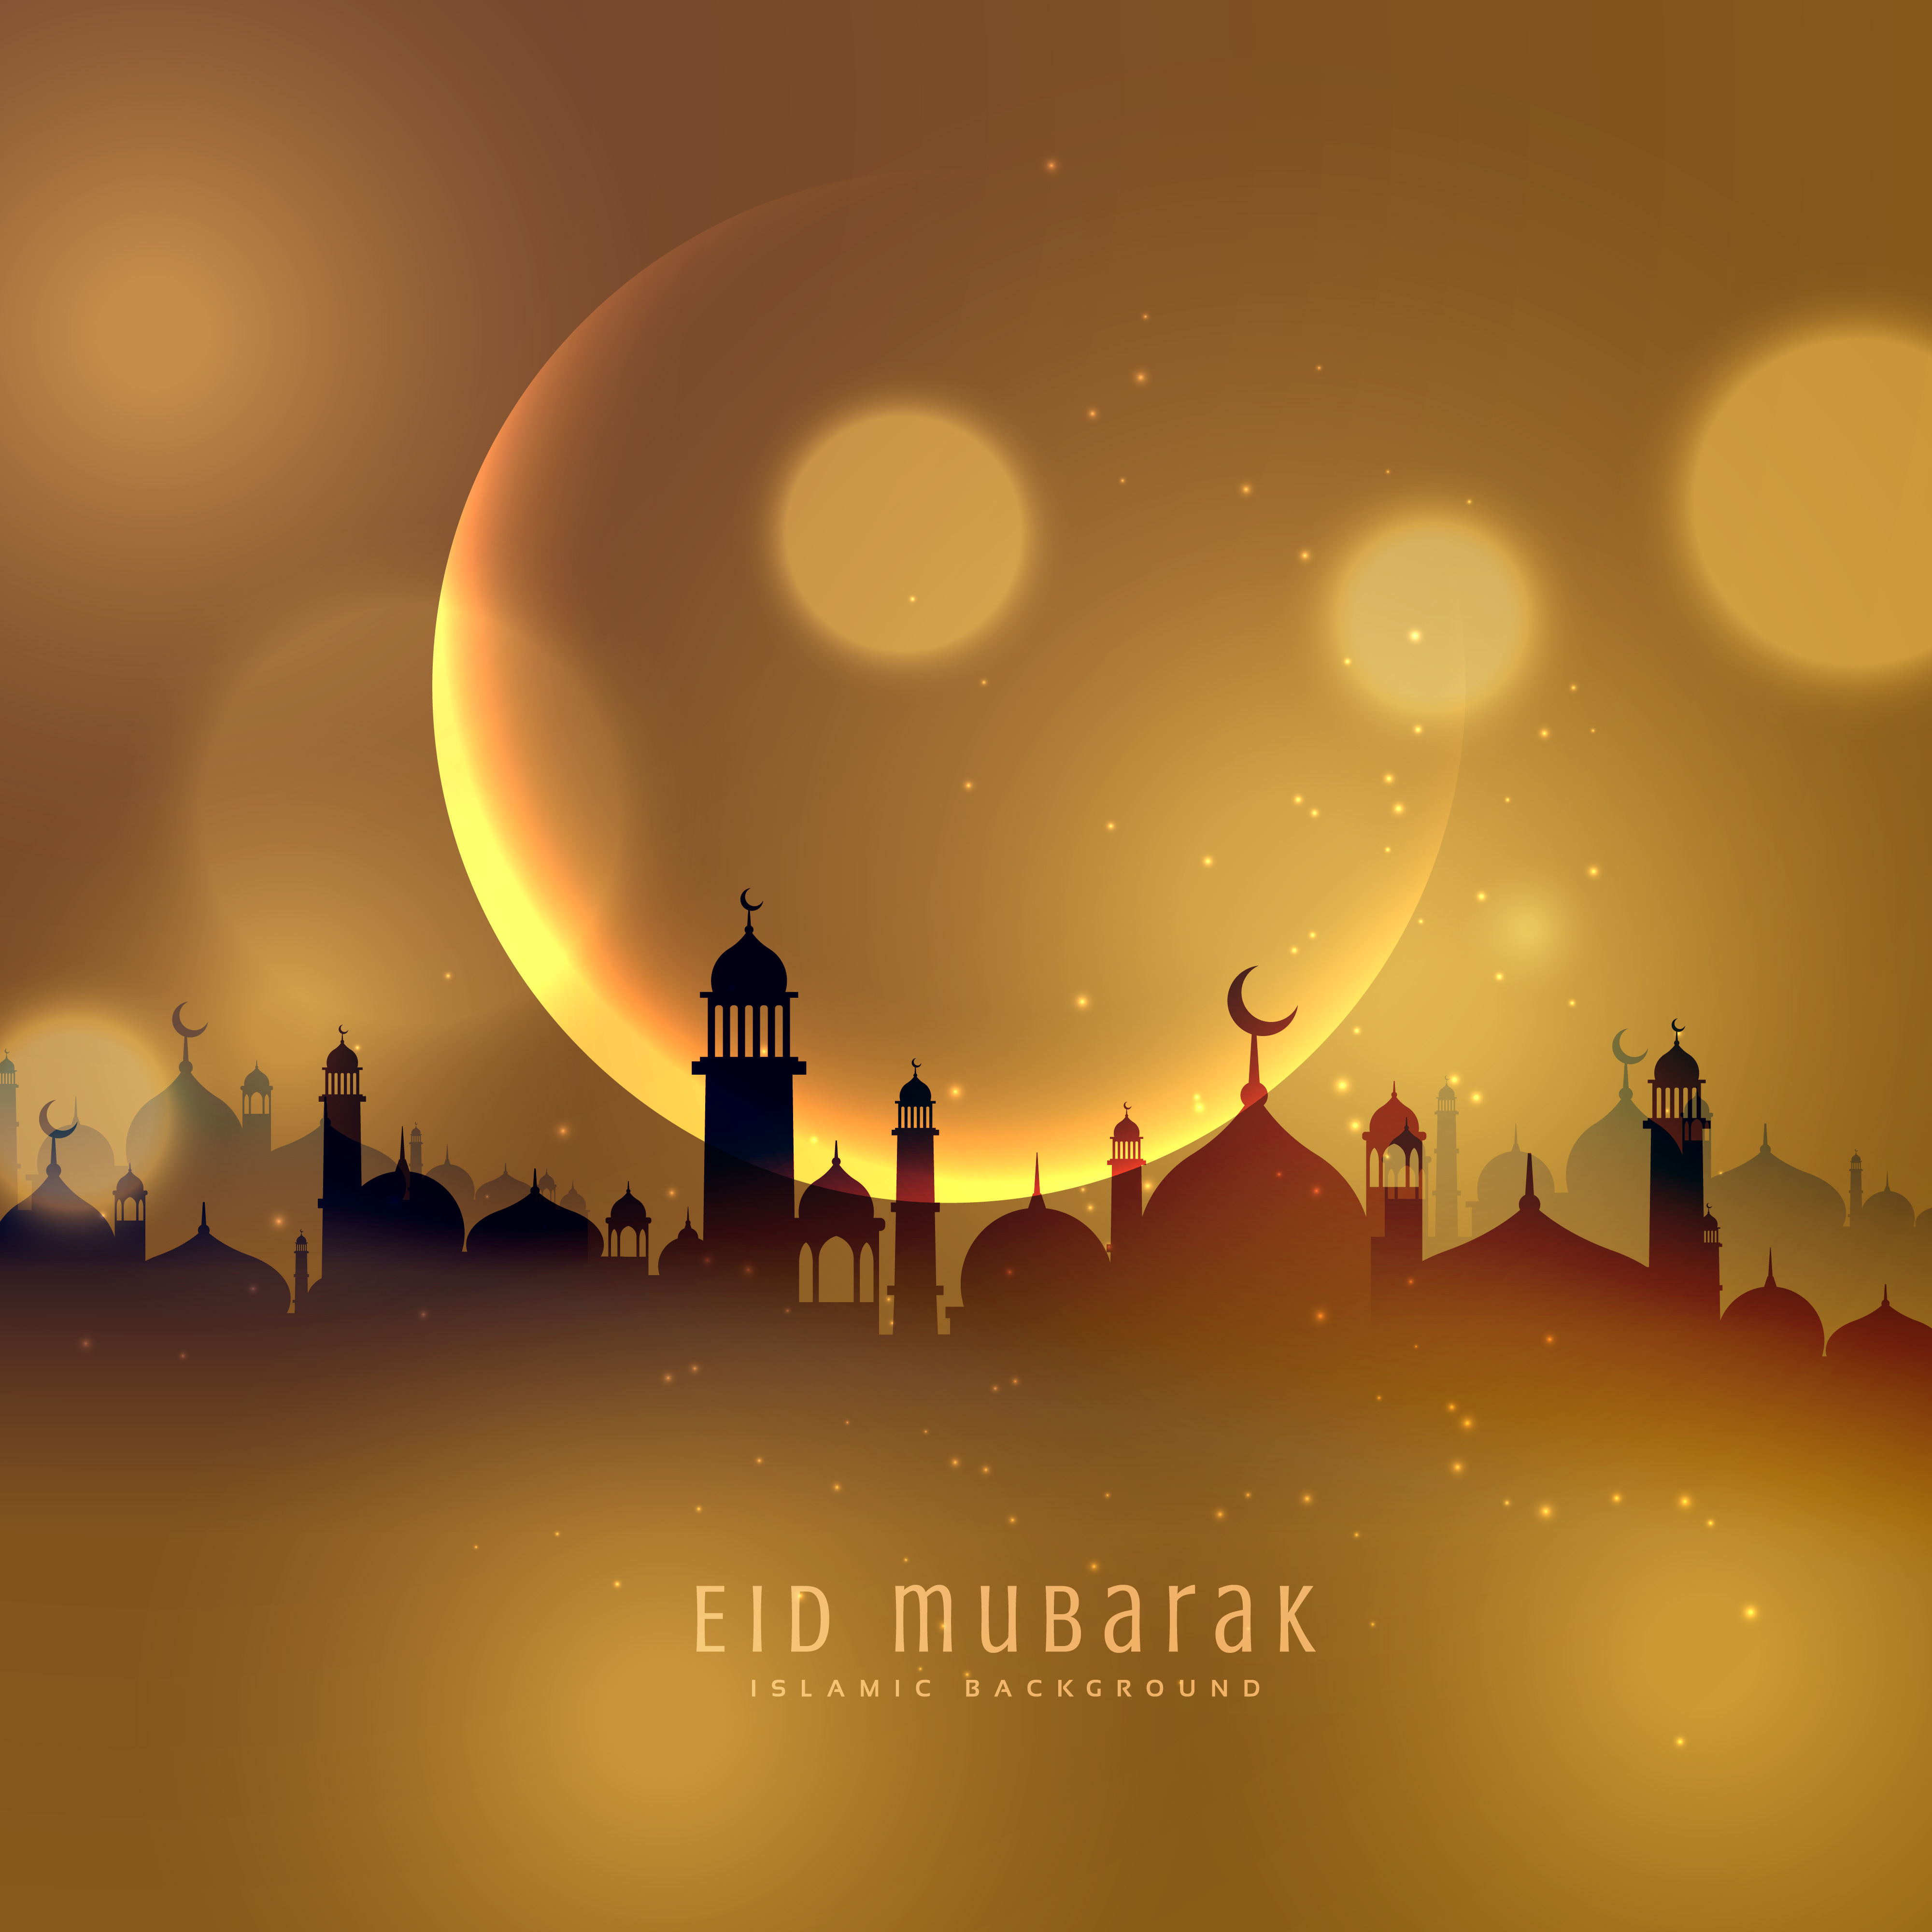 Shining light and mosque, eid al adha writing ppt background #4079